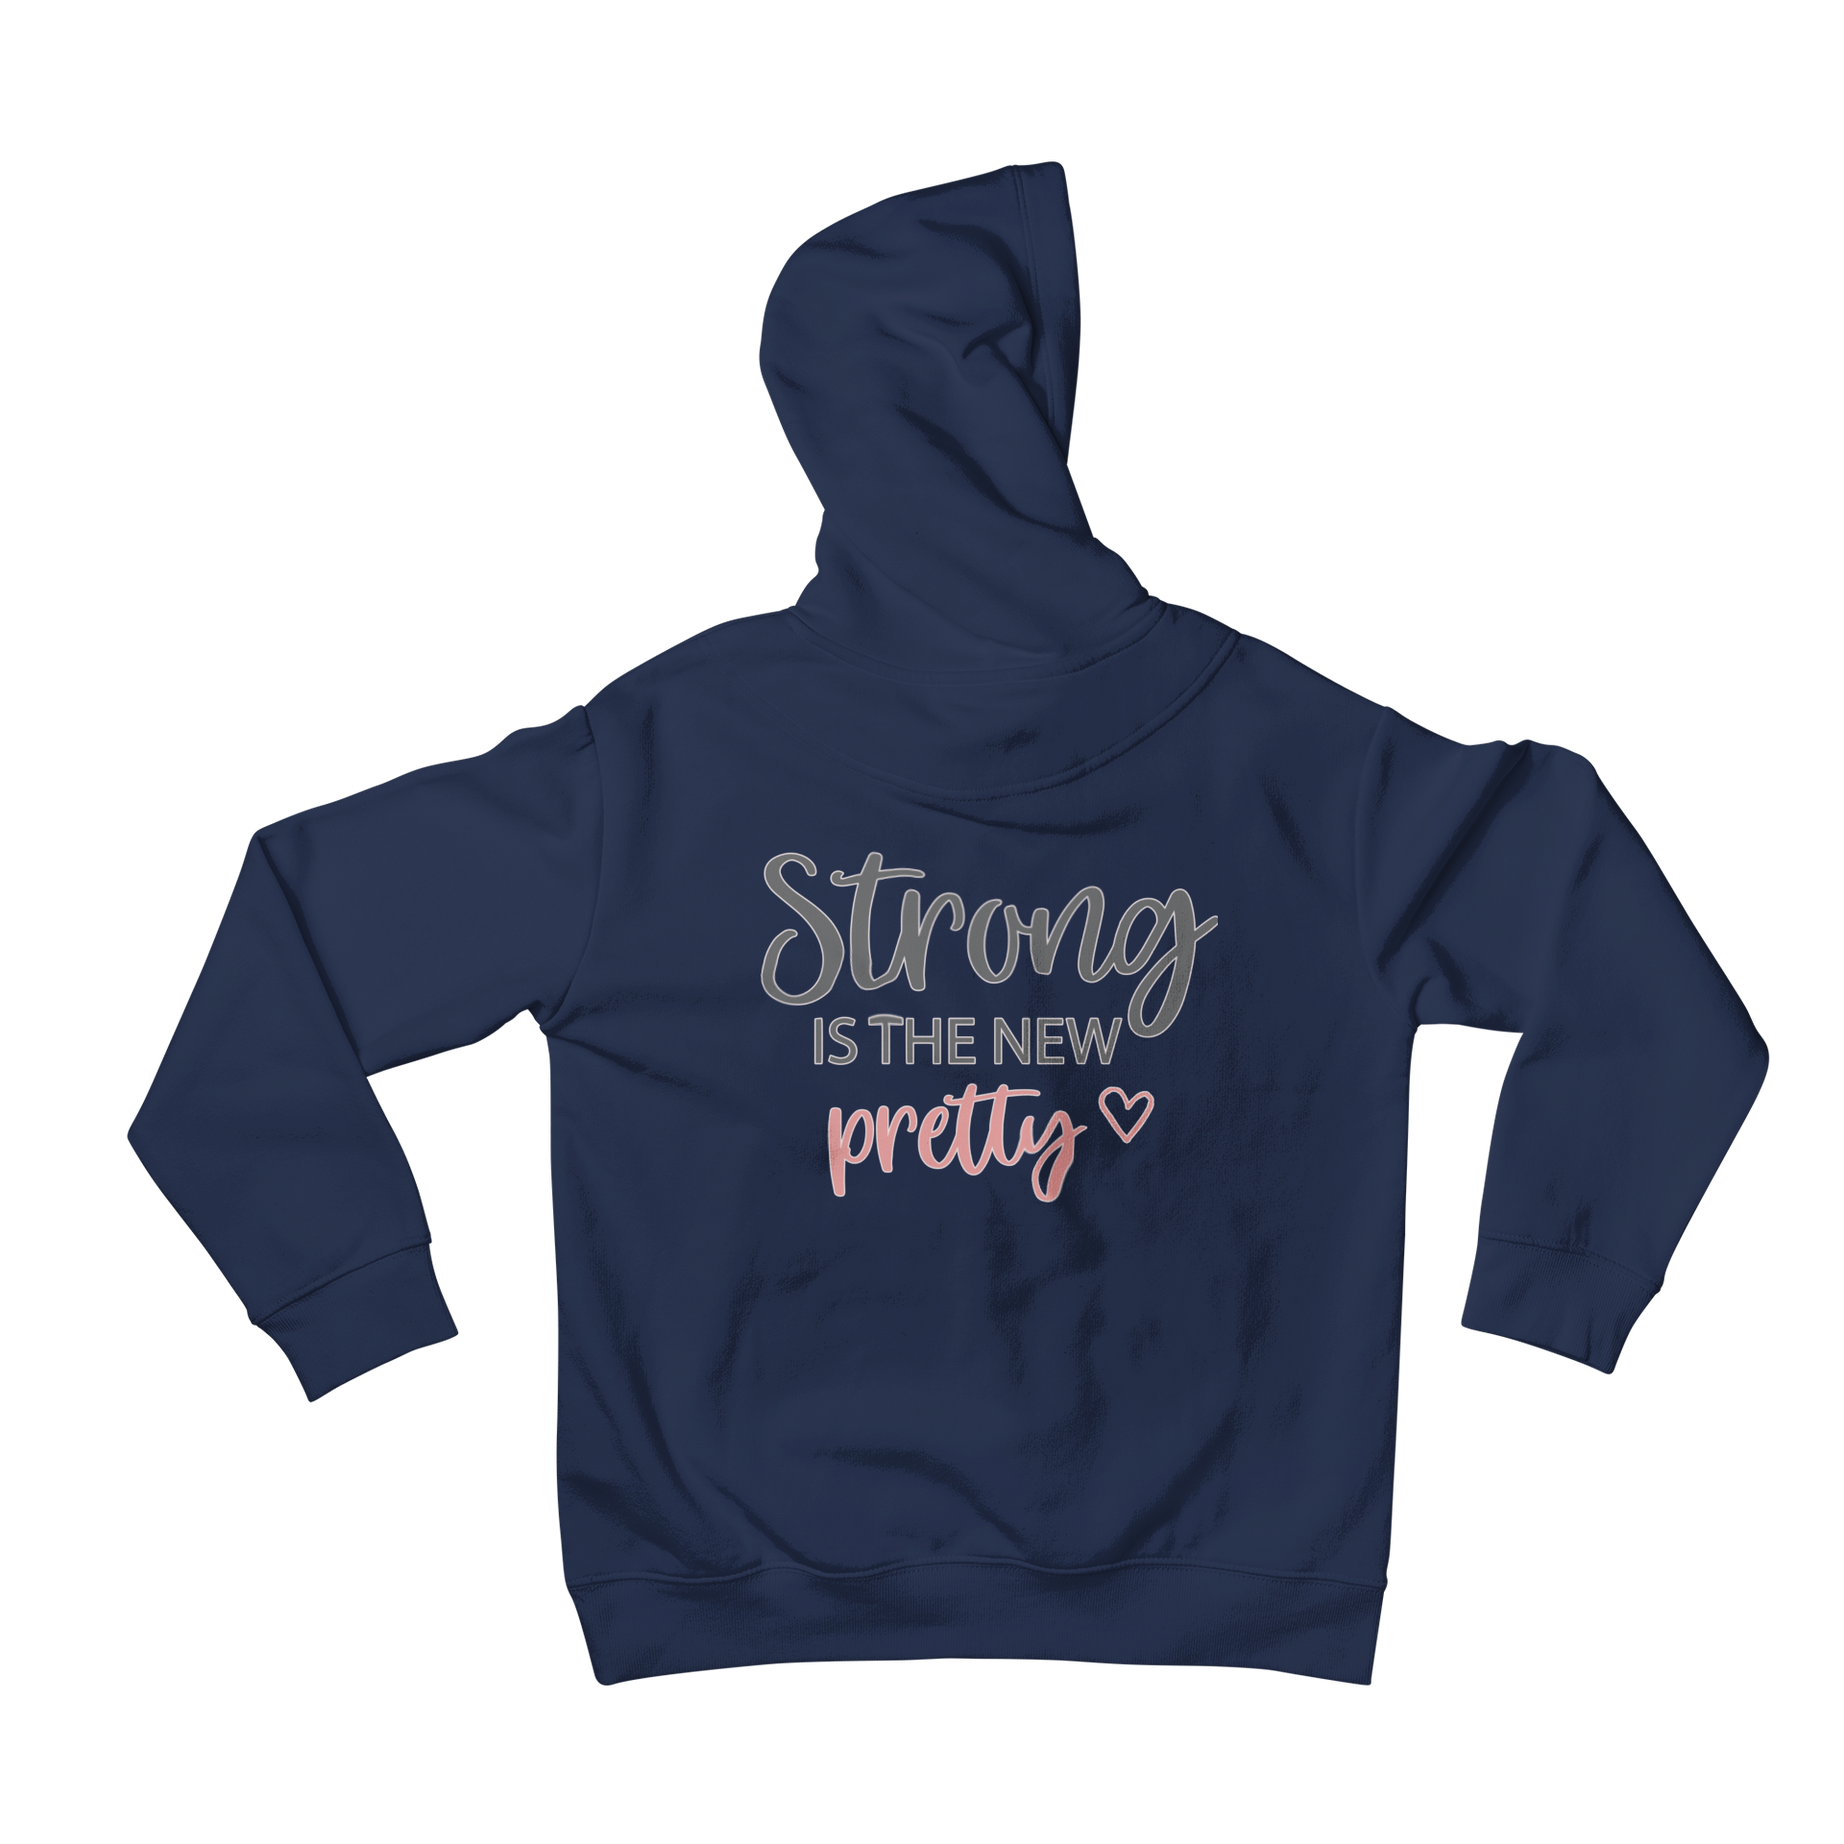 Looking for a hoodie that's both comfortable and stylish? Check out Teevolution's "Strong is the New Pretty" hoodie. It's warm, cozy, and features a bold slogan on the back that will make you feel empowered every time you wear it. Shop now and upgrade your wardrobe with Teevolution!